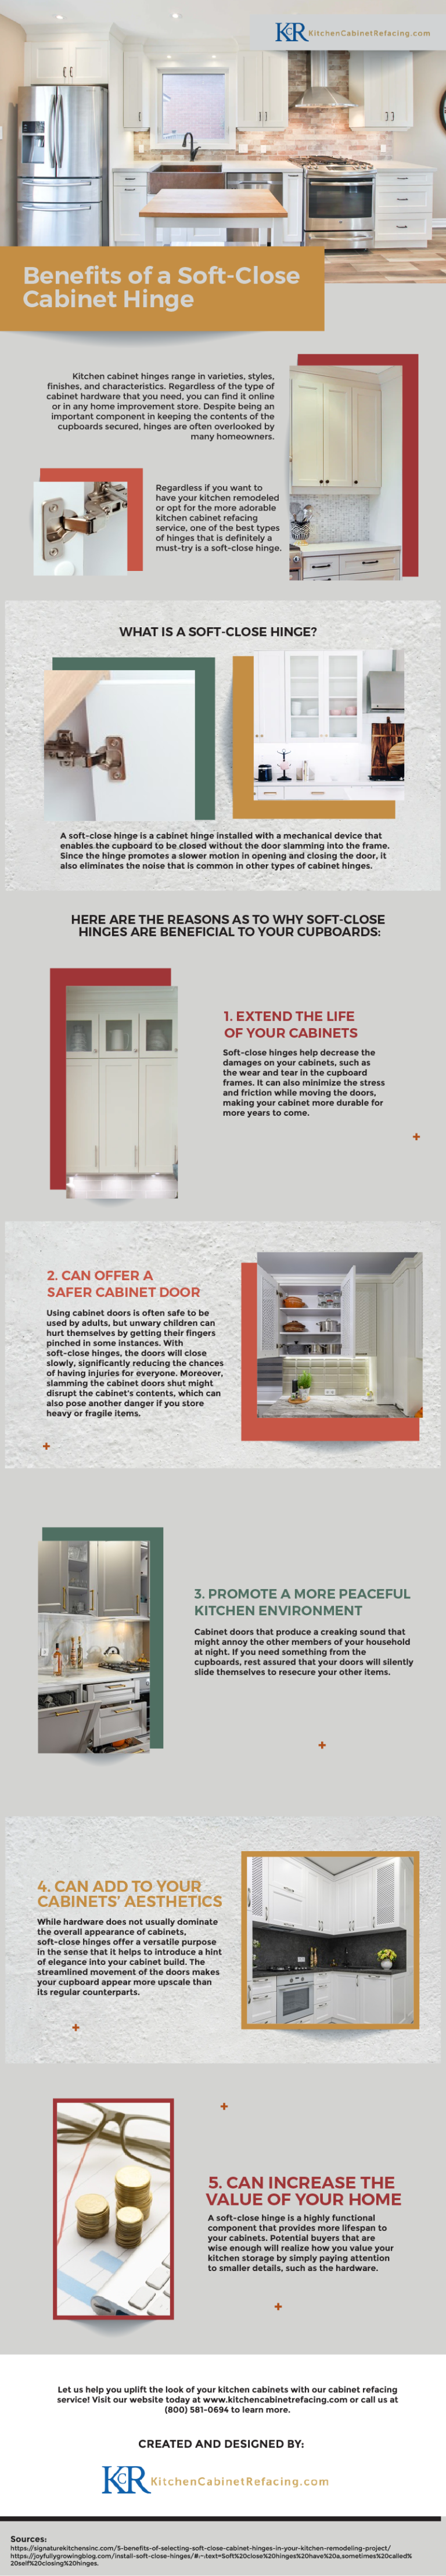 Benefits_of_a_Soft_Close_Cabinet_Hinge_infographic_image